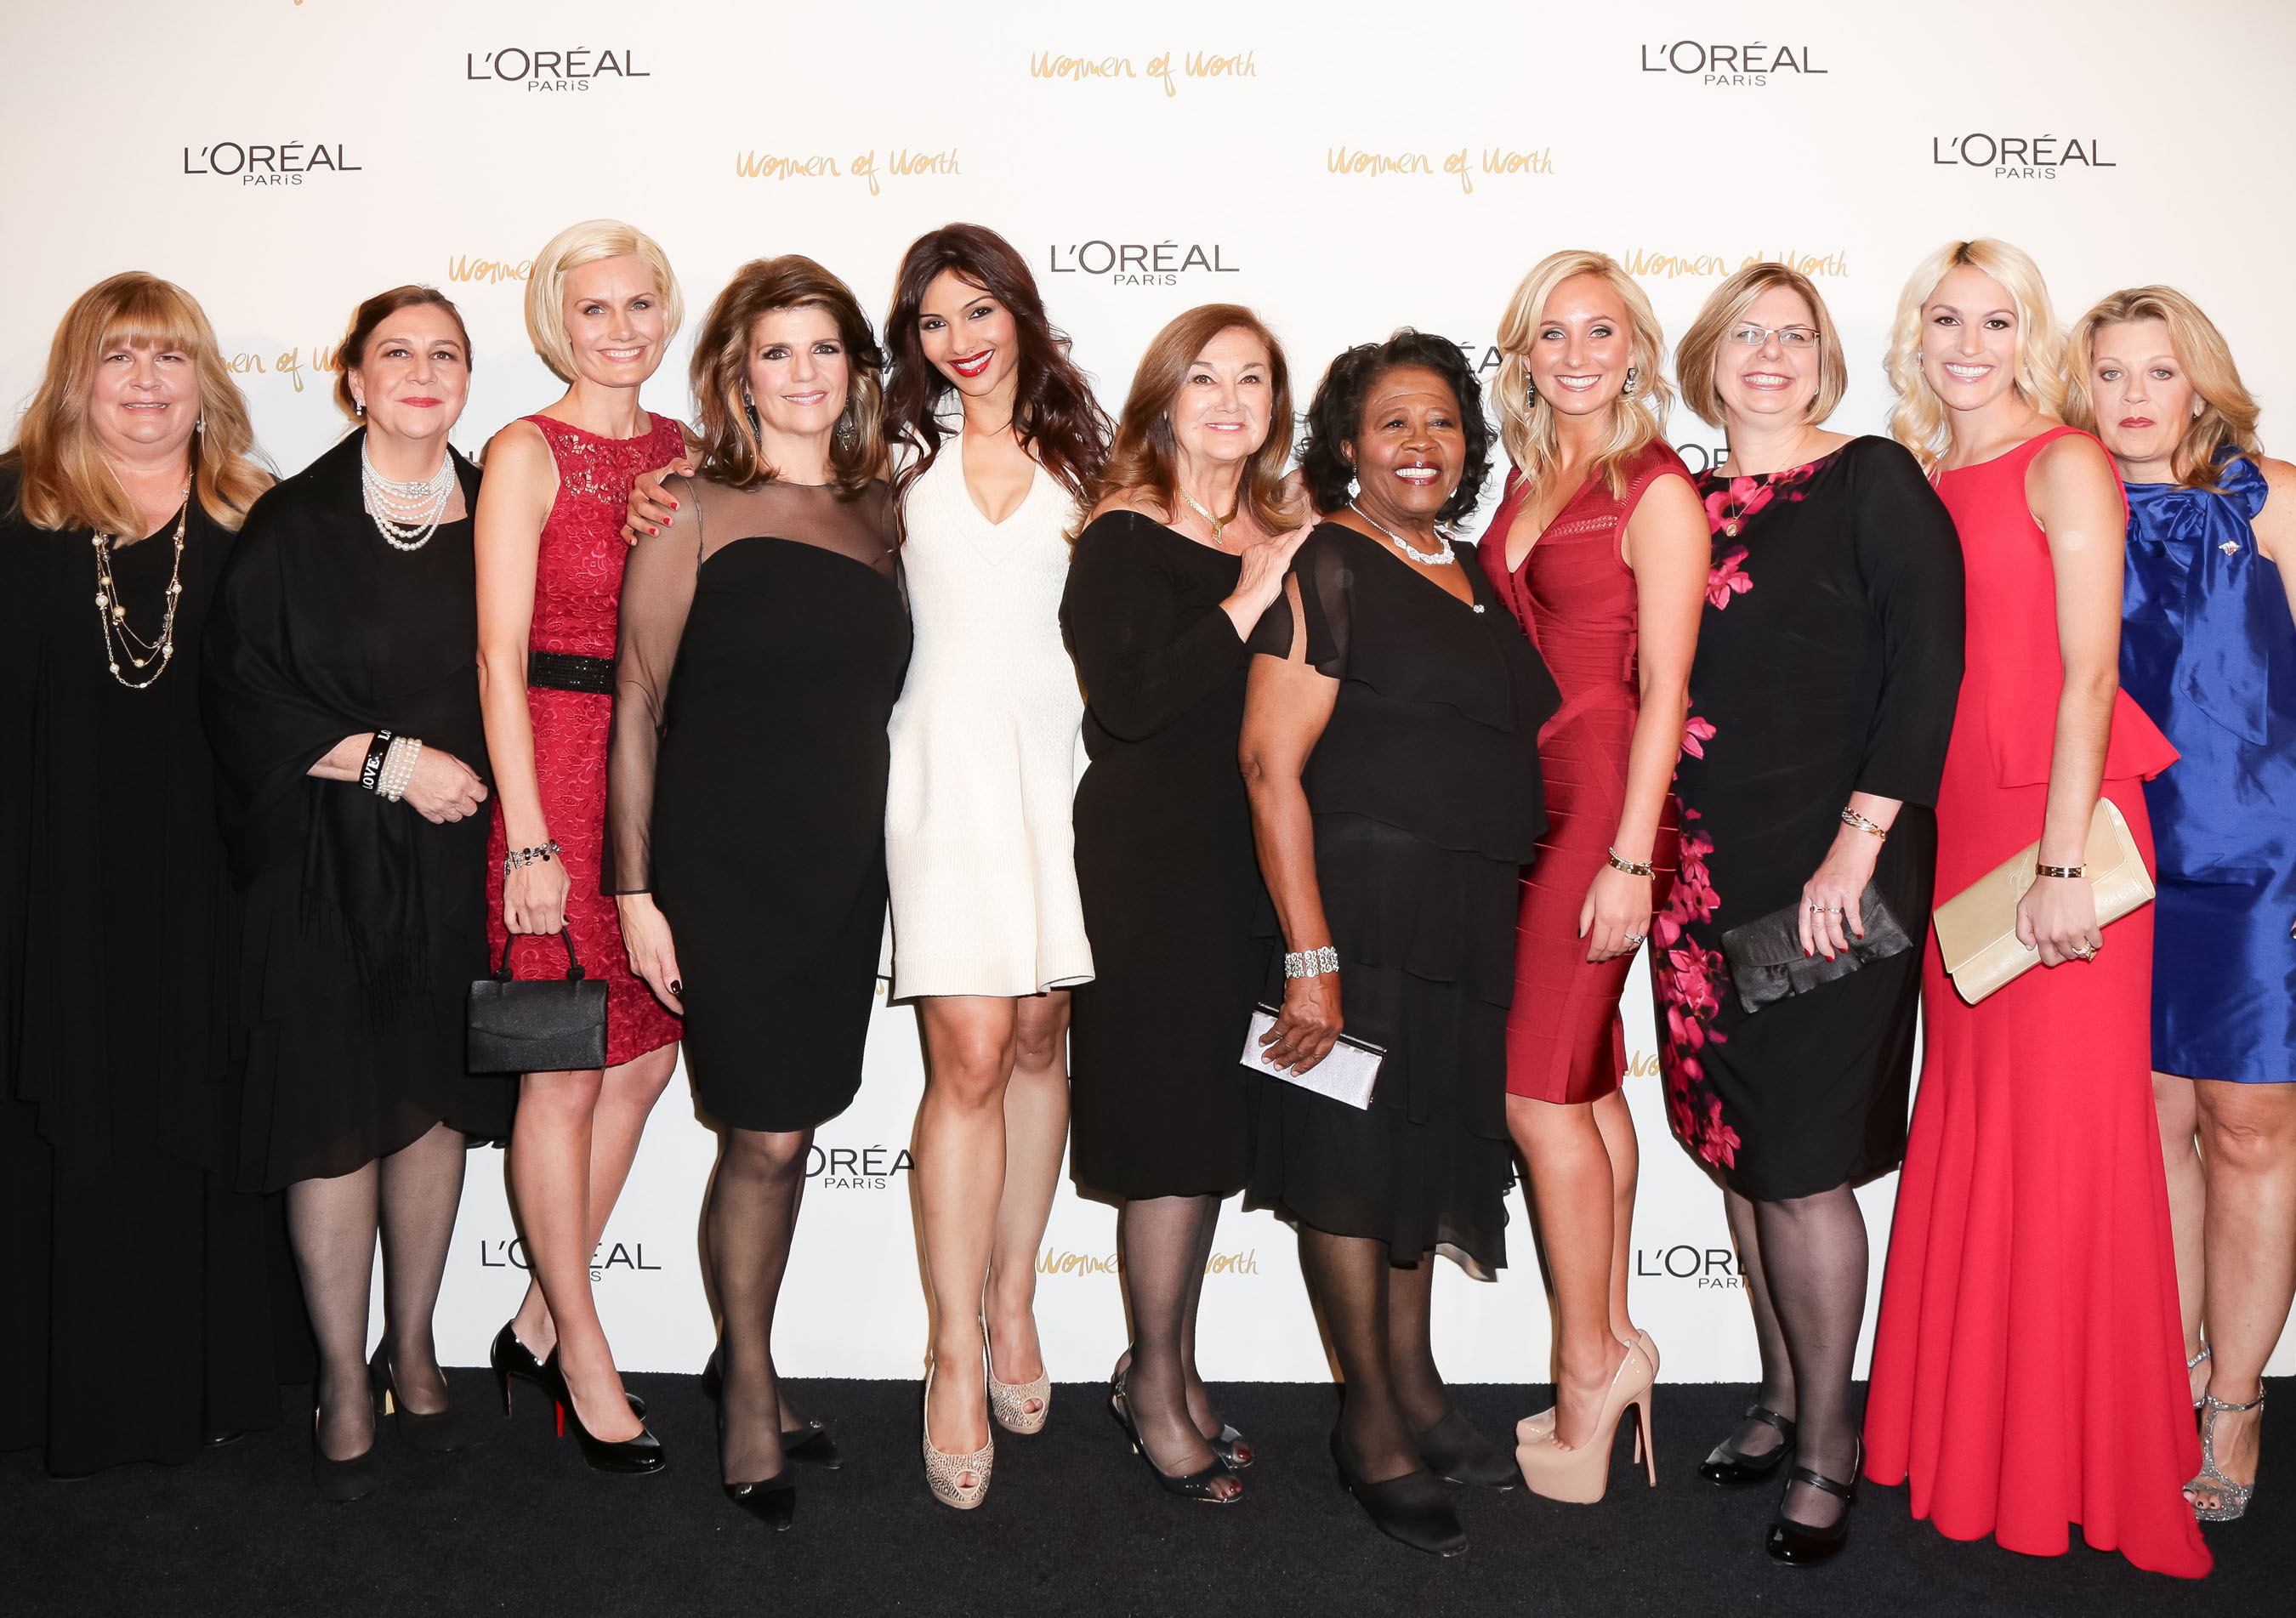 The 2013 L'Oreal Paris Women of Worth honorees, including national honoree Lauren Book and L'Oreal Paris President Karen T. Fondu, were celebrated for making a beautiful difference in their communities at The Pierre on December 3, 2013 in New York City. (PRNewsFoto/L'Oreal Paris) (PRNewsFoto/L'OREAL PARIS)